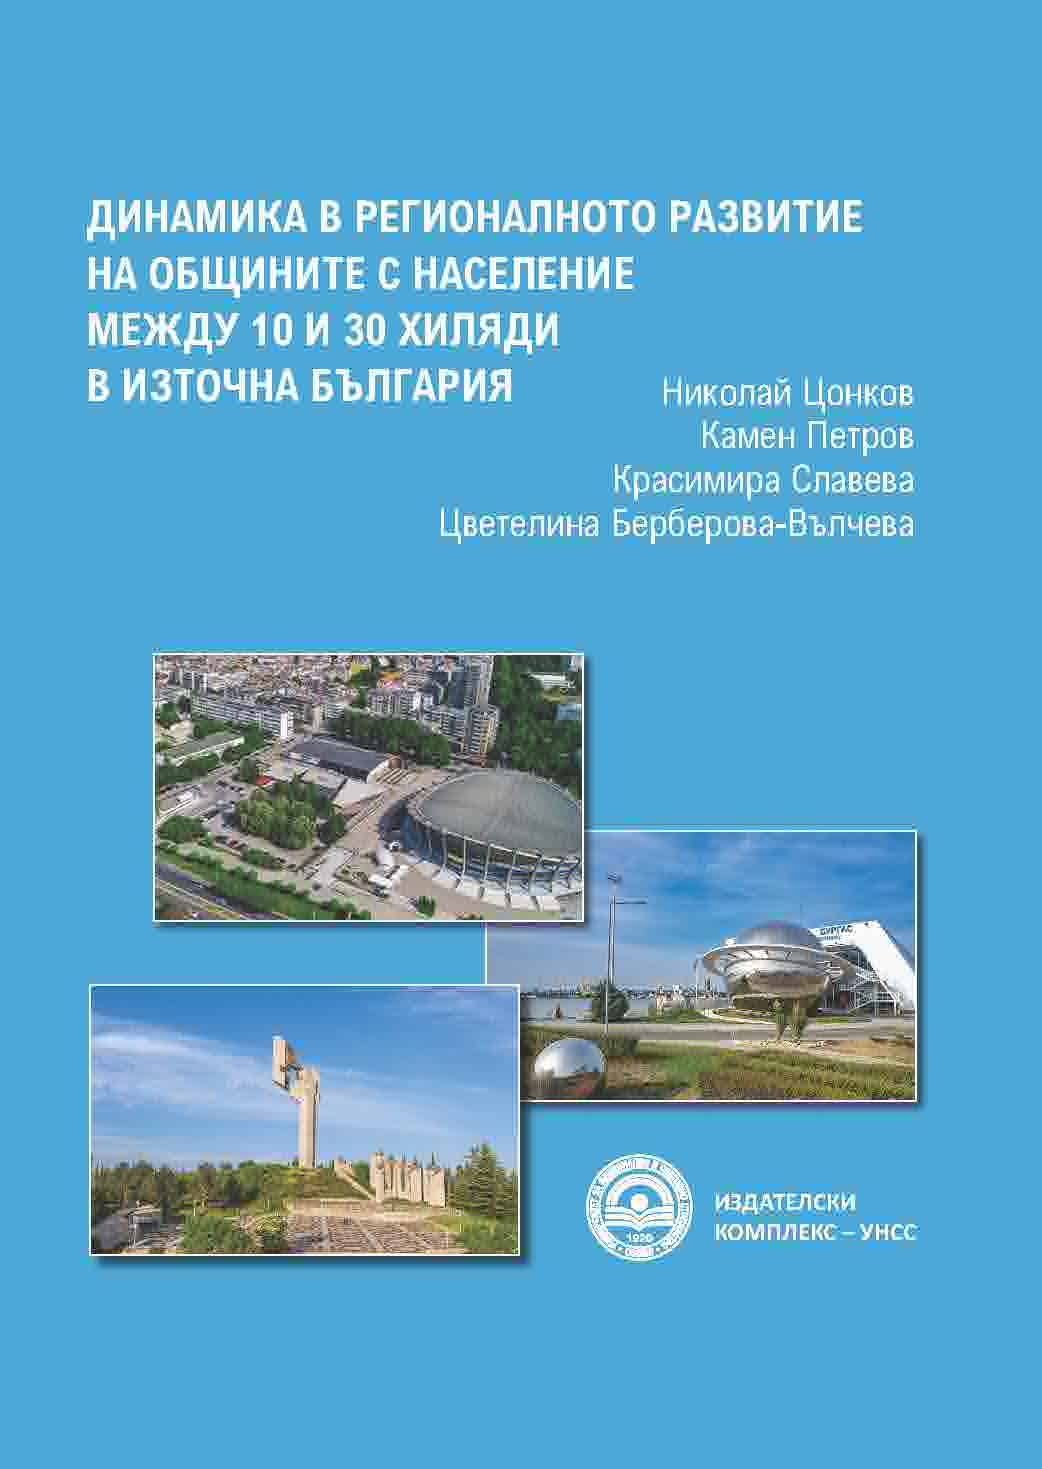 Dynamics in the Regional Development of Municipalities with a Population Between 10 and 30 Thousand in Eastern Bulgaria